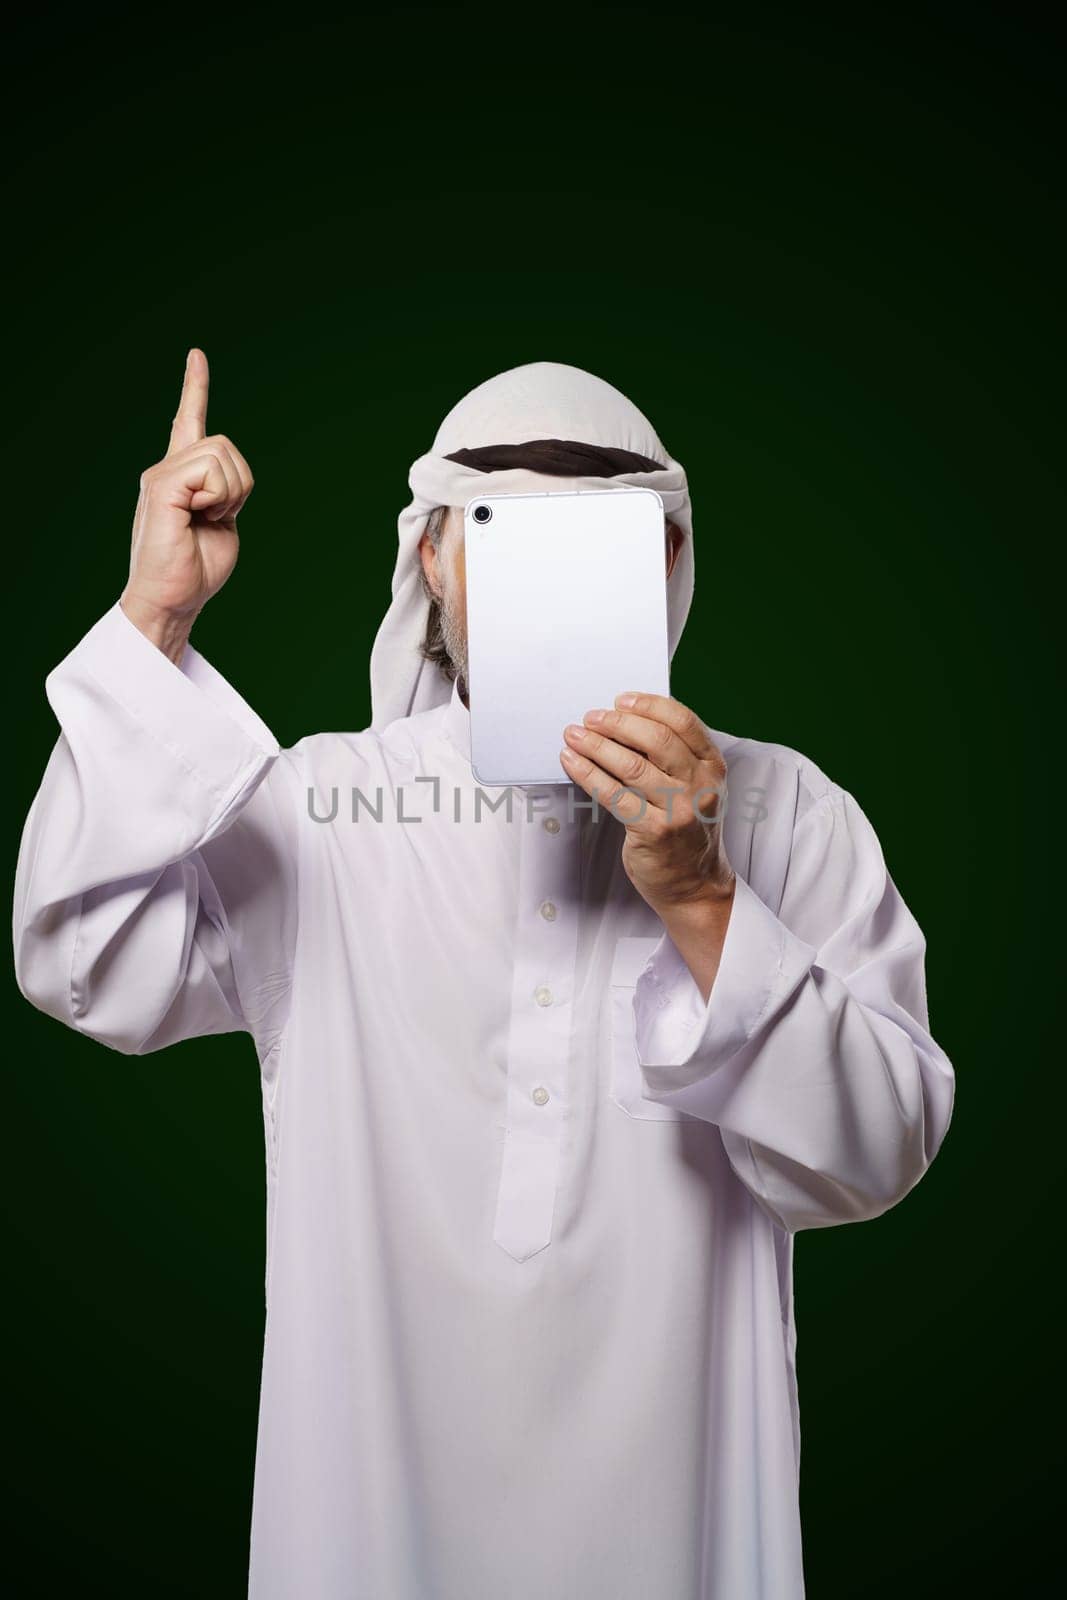 Muslim anonymous concept. Arab person holds digital tablet, face covered, index finger up, representing the concept of Islamic censorship online. Image portrays issues of privacy, security, and anonymity in the digital world. by LipikStockMedia